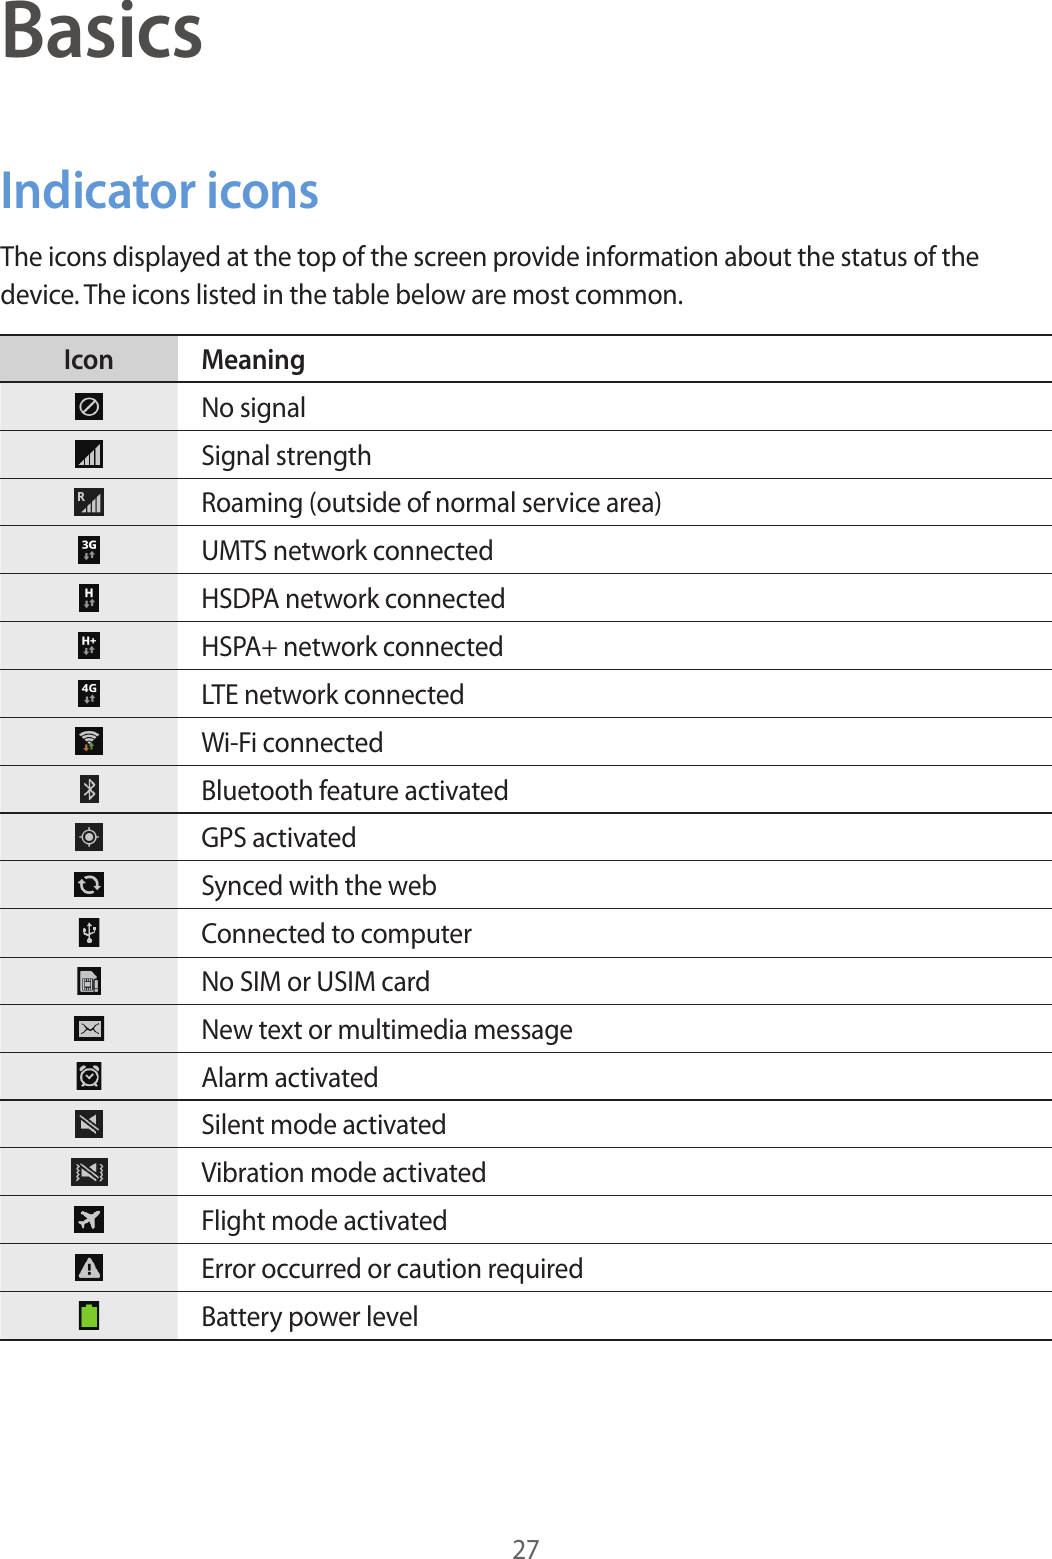 27BasicsIndicator iconsThe icons displayed at the top of the screen provide information about the status of the device. The icons listed in the table below are most common.Icon MeaningNo signalSignal strengthRoaming (outside of normal service area)UMTS network connectedHSDPA network connectedHSPA+ network connectedLTE network connectedWi-Fi connectedBluetooth feature activatedGPS activatedSynced with the webConnected to computerNo SIM or USIM cardNew text or multimedia messageAlarm activatedSilent mode activatedVibration mode activatedFlight mode activatedError occurred or caution requiredBattery power level